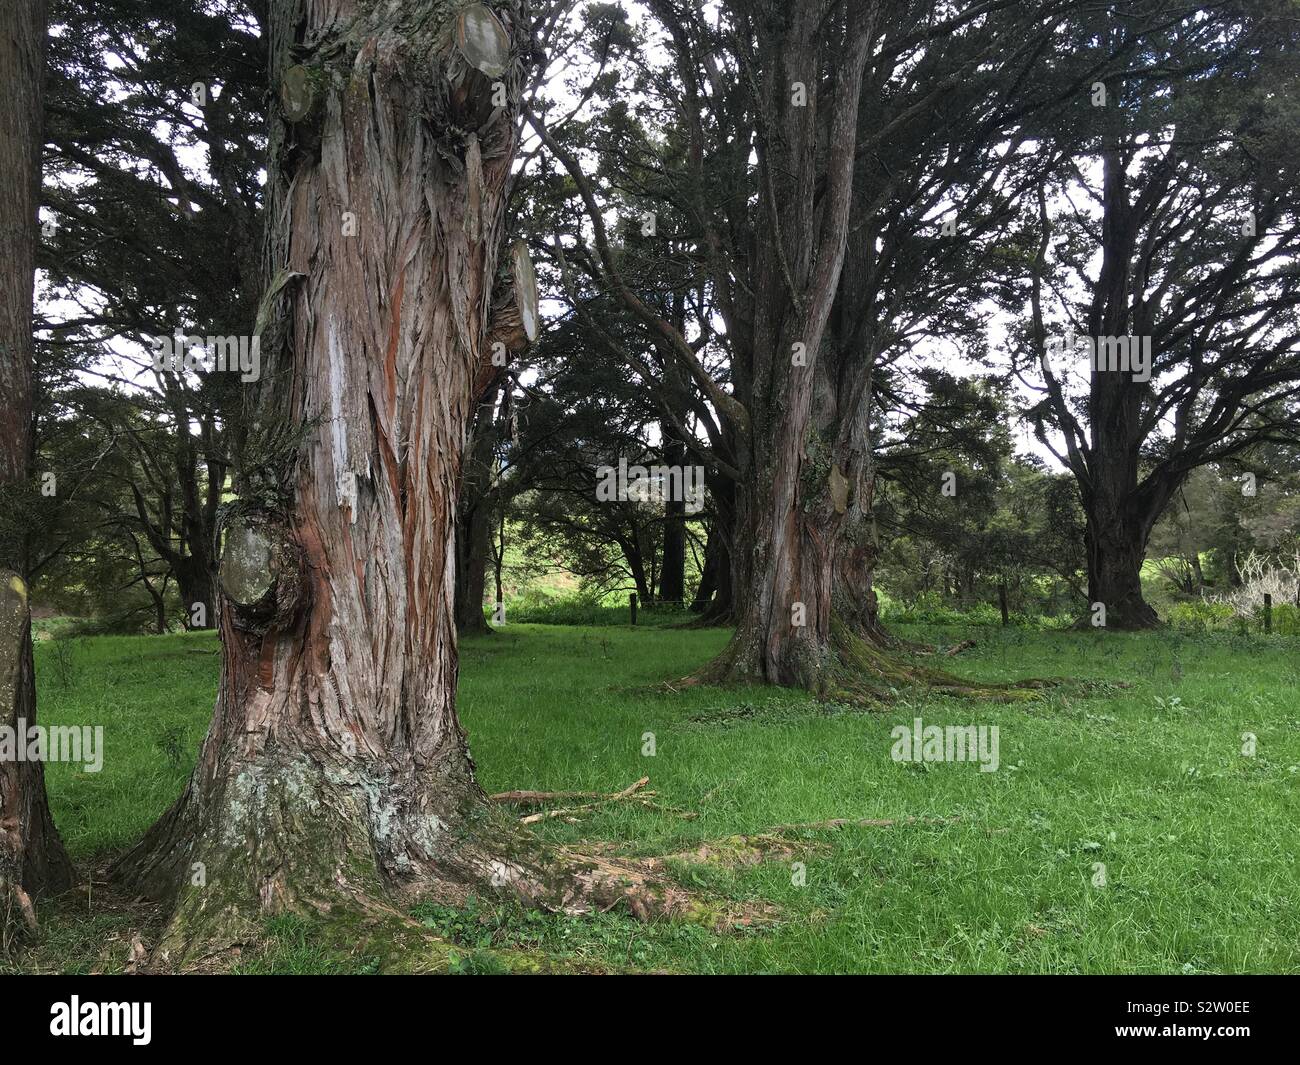 Mature totara trees in a clearing near a river on a farm in New Zealand. Stock Photo